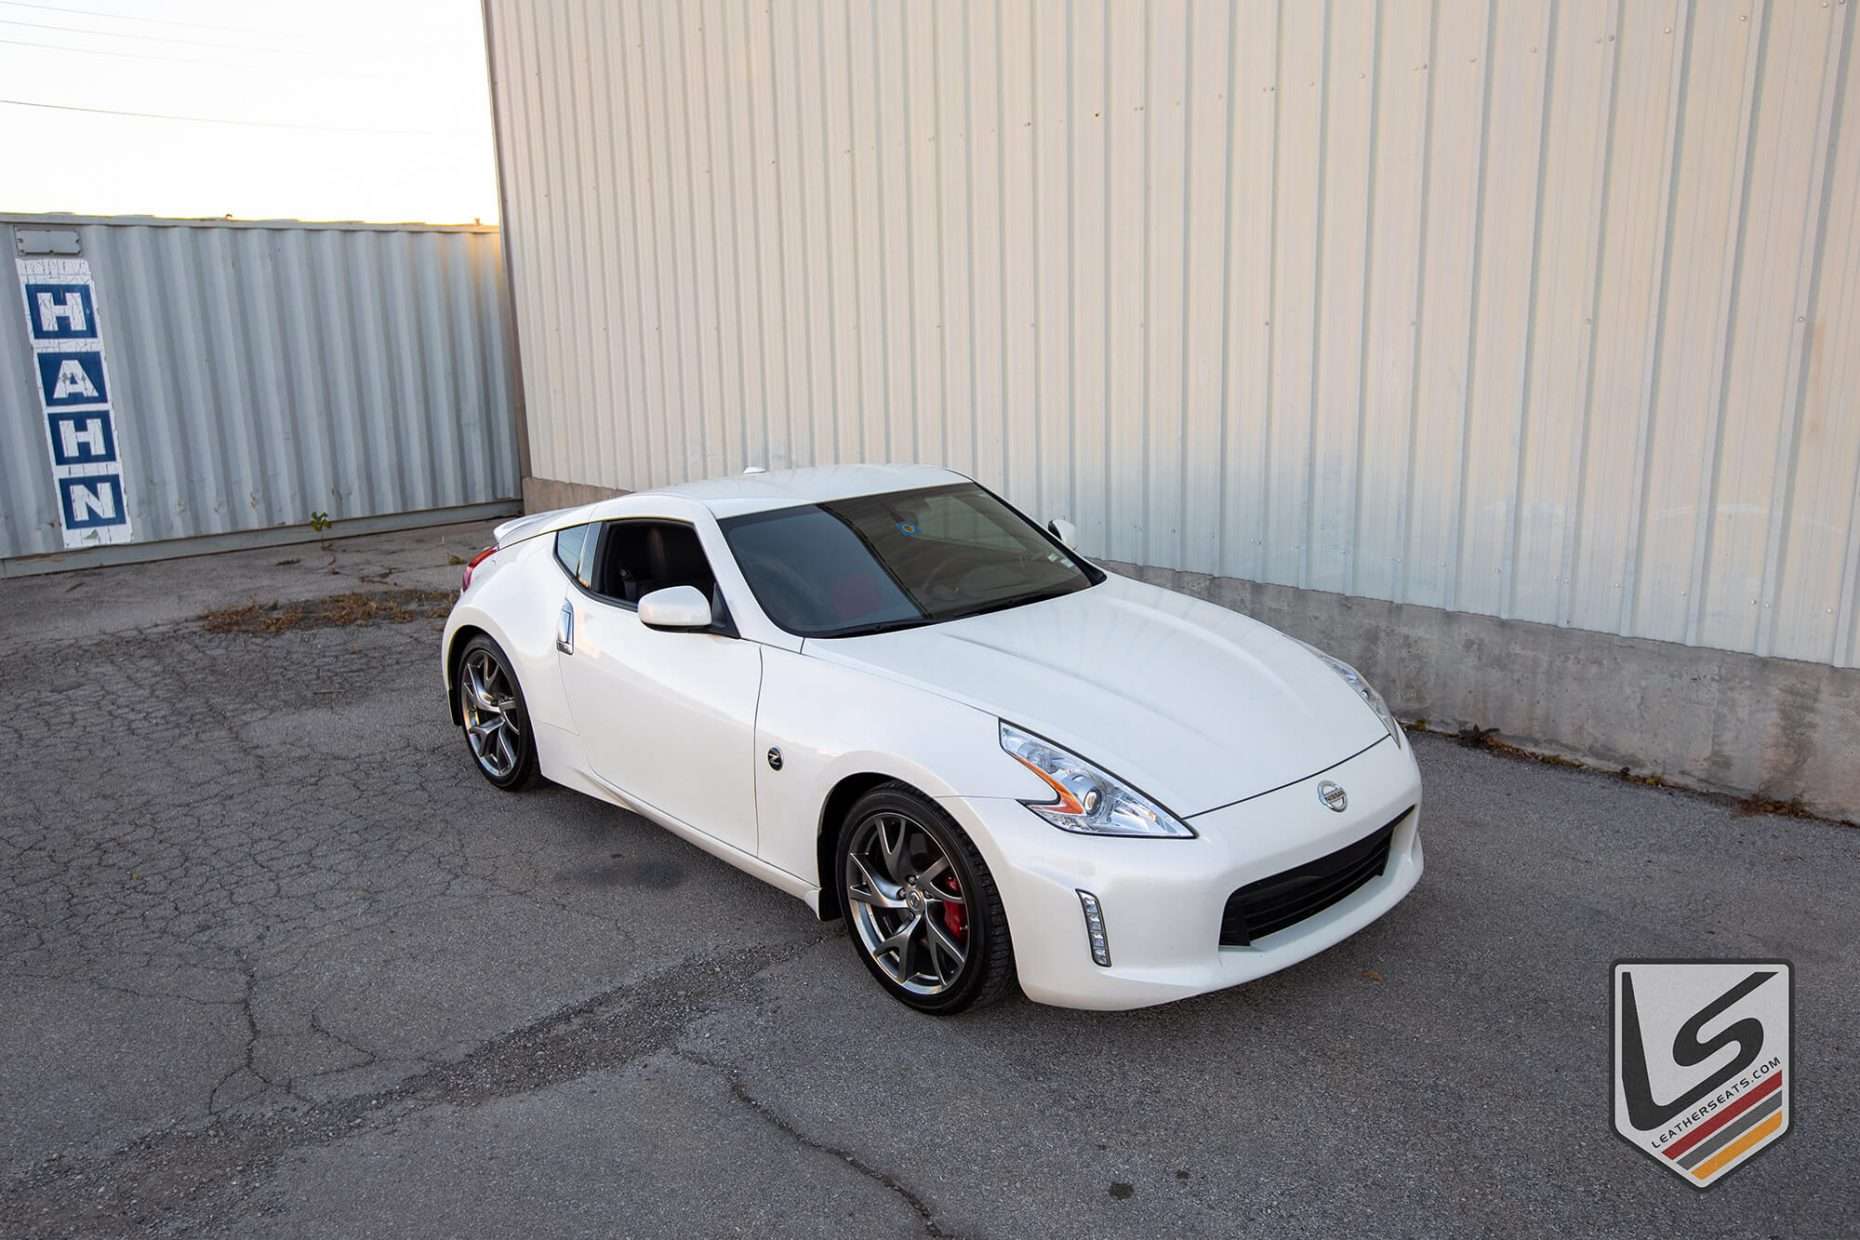 2016 Nissan 370Z with leatherseats.com upholstery